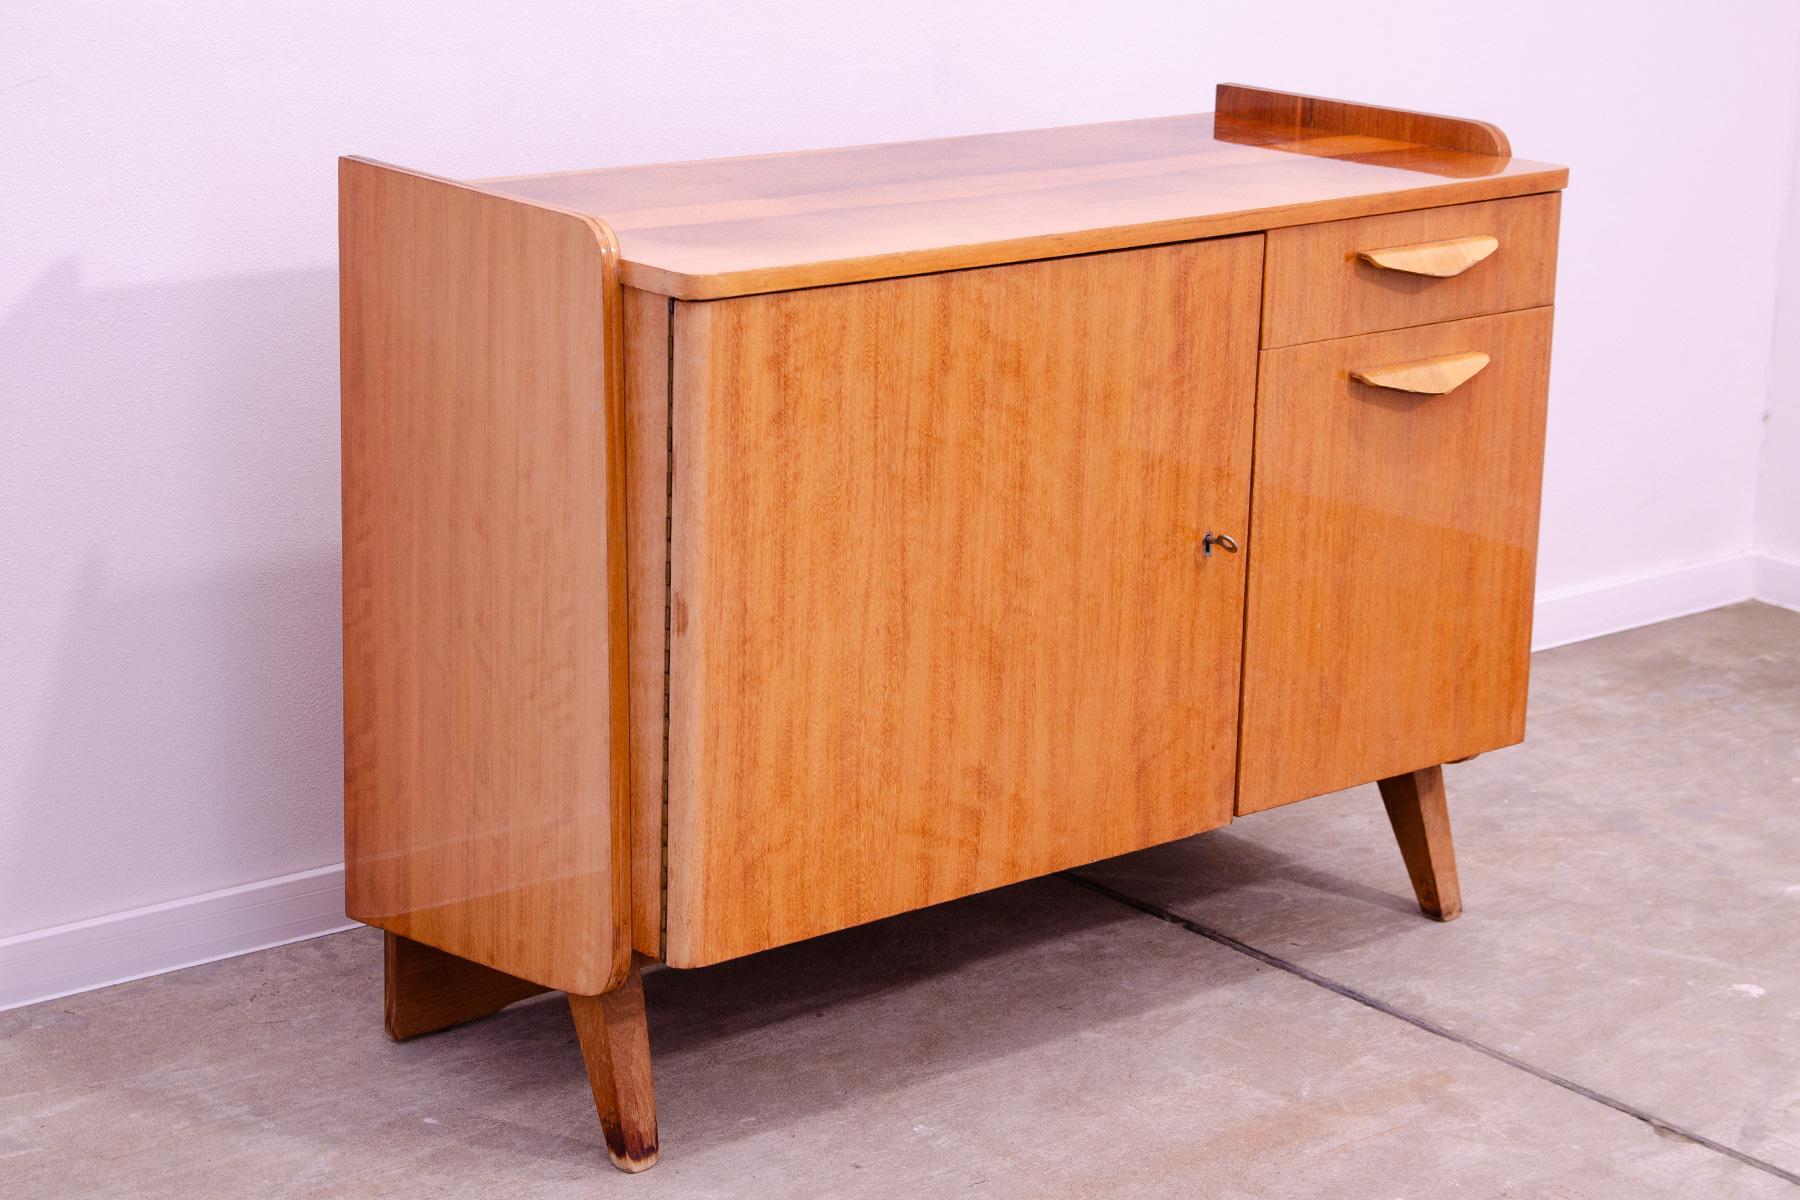 Mid century Vintage small cabinet or TV table from the 1960´s. It was designed by František Jirák and was manufactured by Tatra nábytok company in the former Czechoslovakia. Walnut veneer, plywood. In very good condition with slight signs of age and